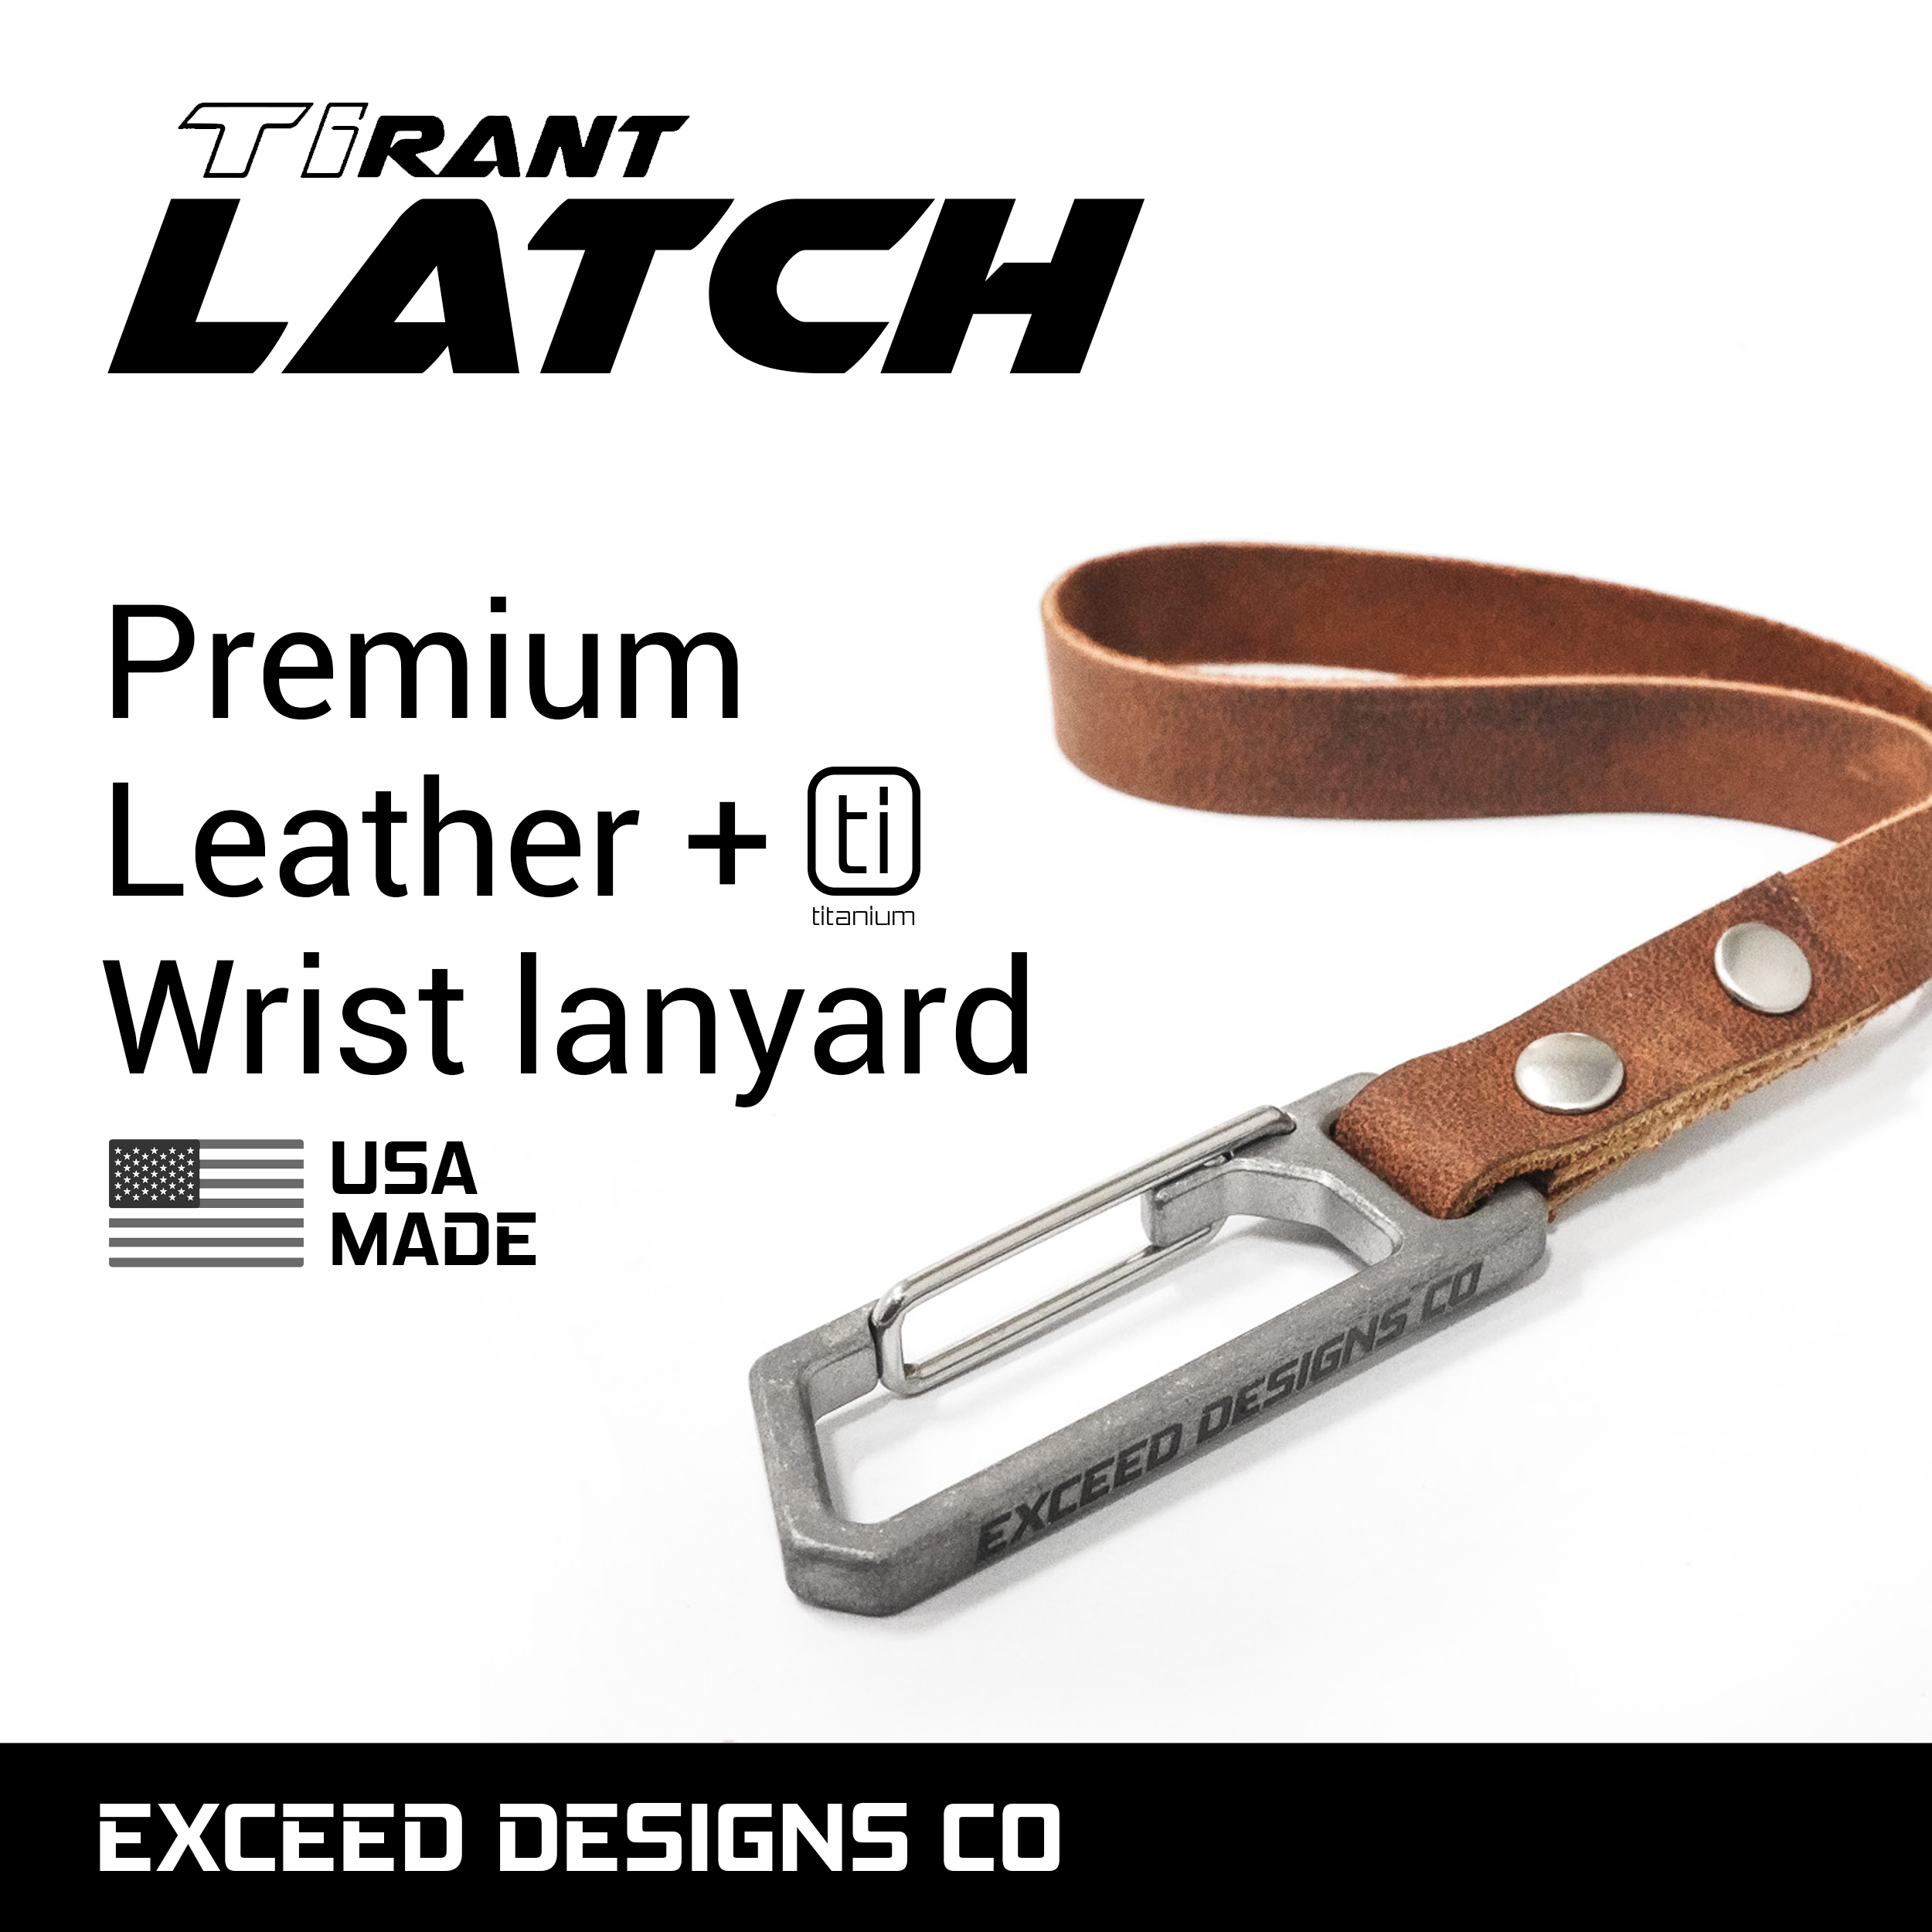 Russet-Brown Tirant Latch 6 Mini Leather Wrist Lanyard w/Titanium Carabiner for Keys & Accessories (Made in Usa)